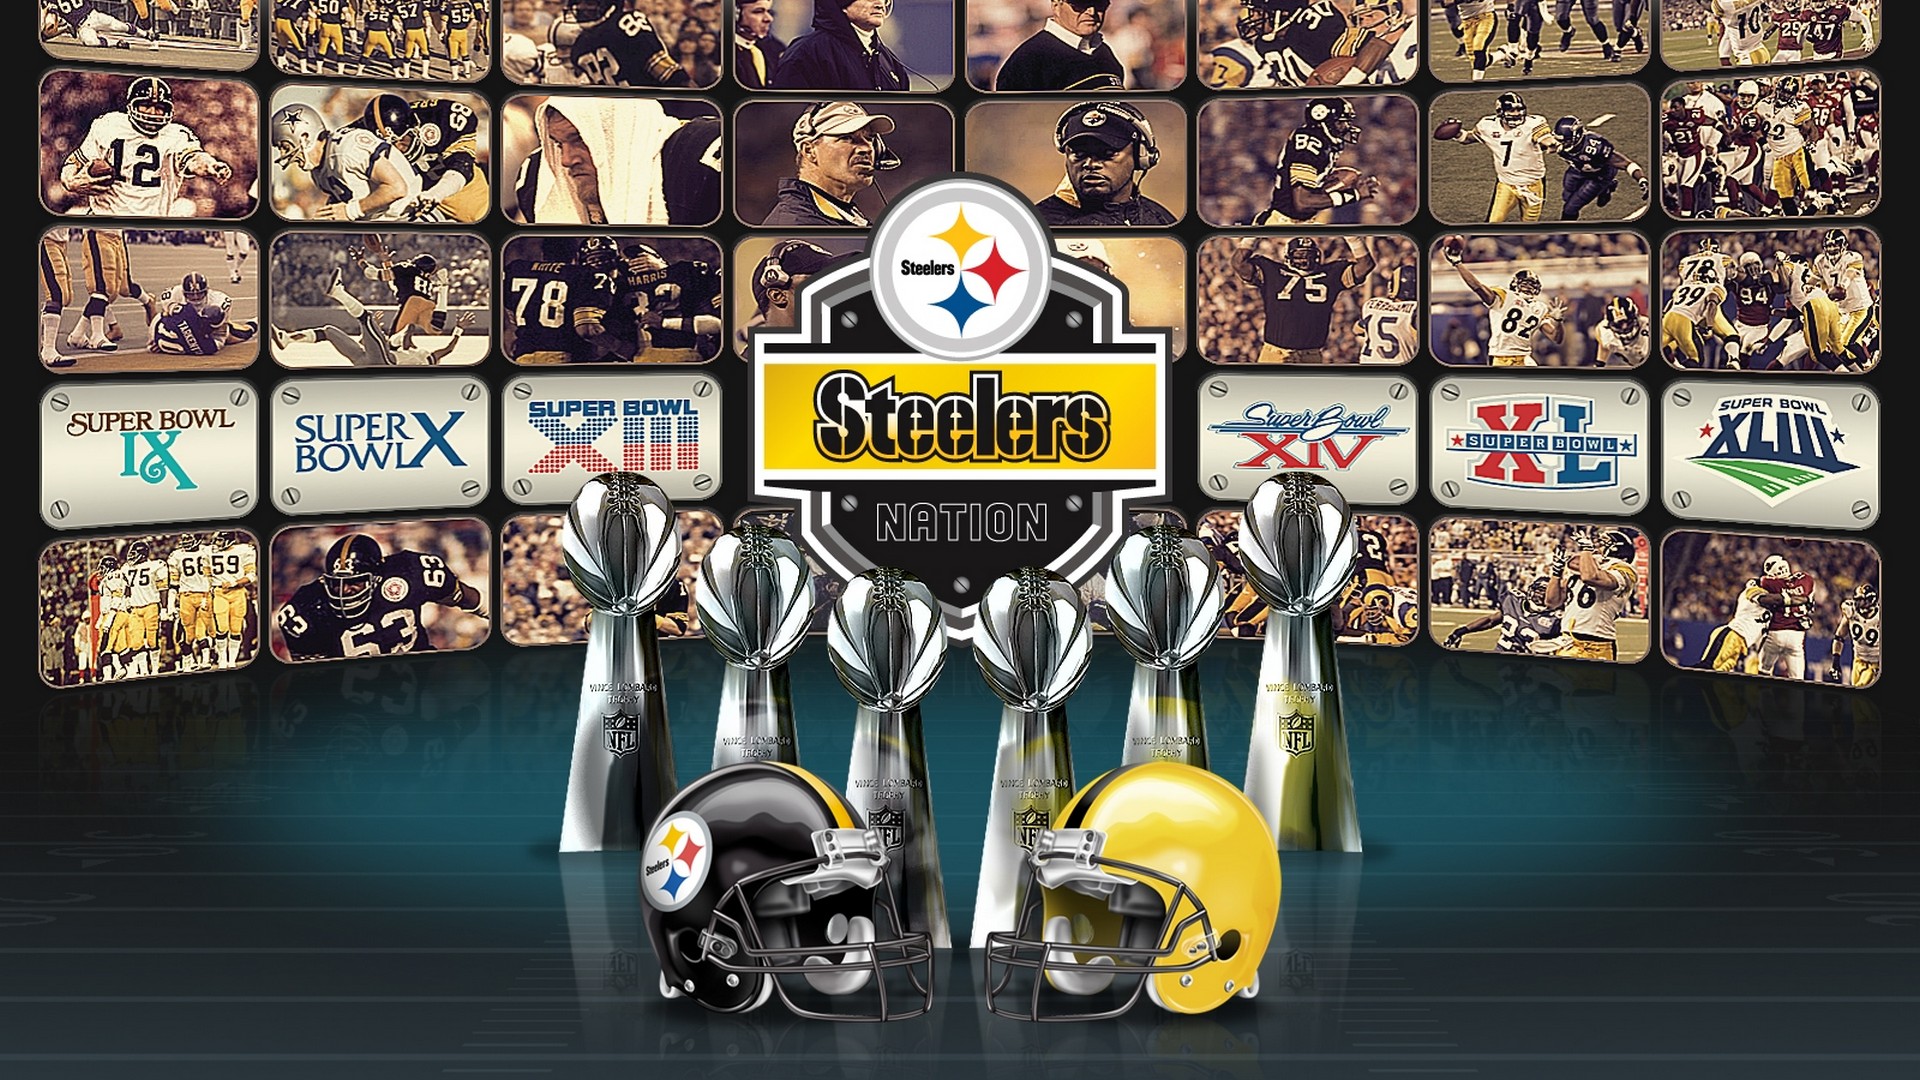 Pittsburgh Steelers HD Wallpapers With Resolution 1920X1080 pixel. You can make this wallpaper for your Mac or Windows Desktop Background, iPhone, Android or Tablet and another Smartphone device for free